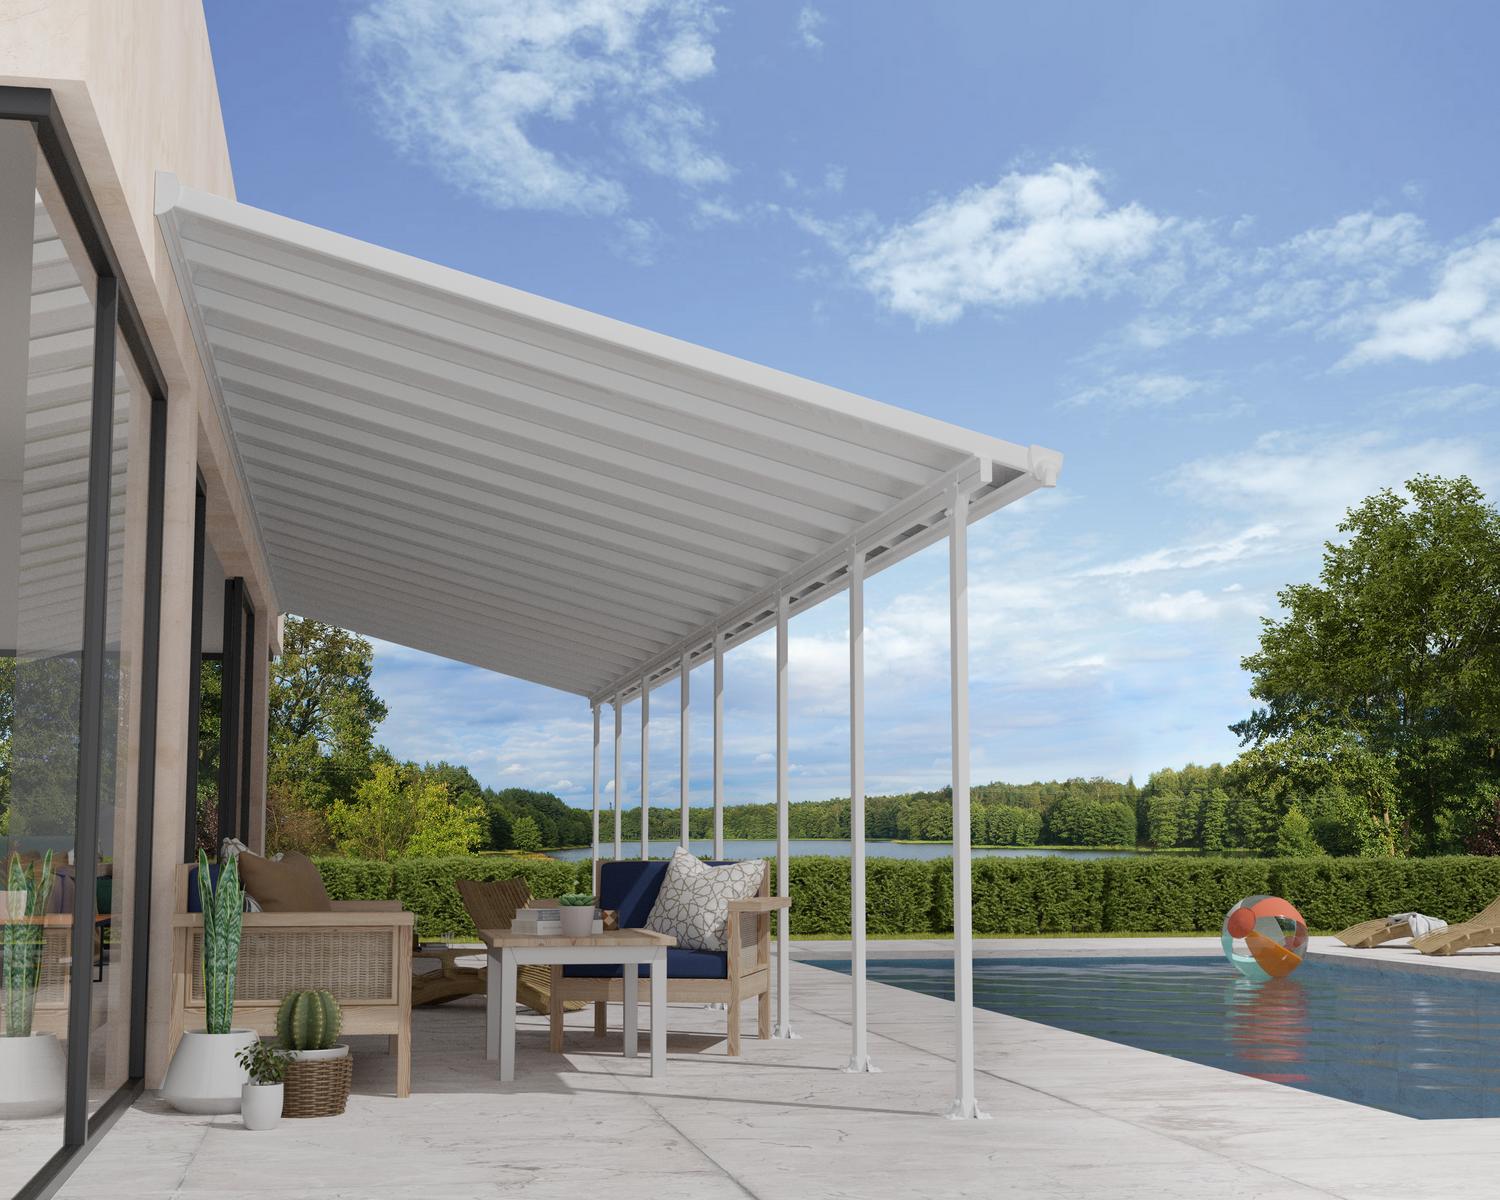 Aluminium Patio Cover 10 ft. x 32 ft. This unit is attached to a house next to a pool patio